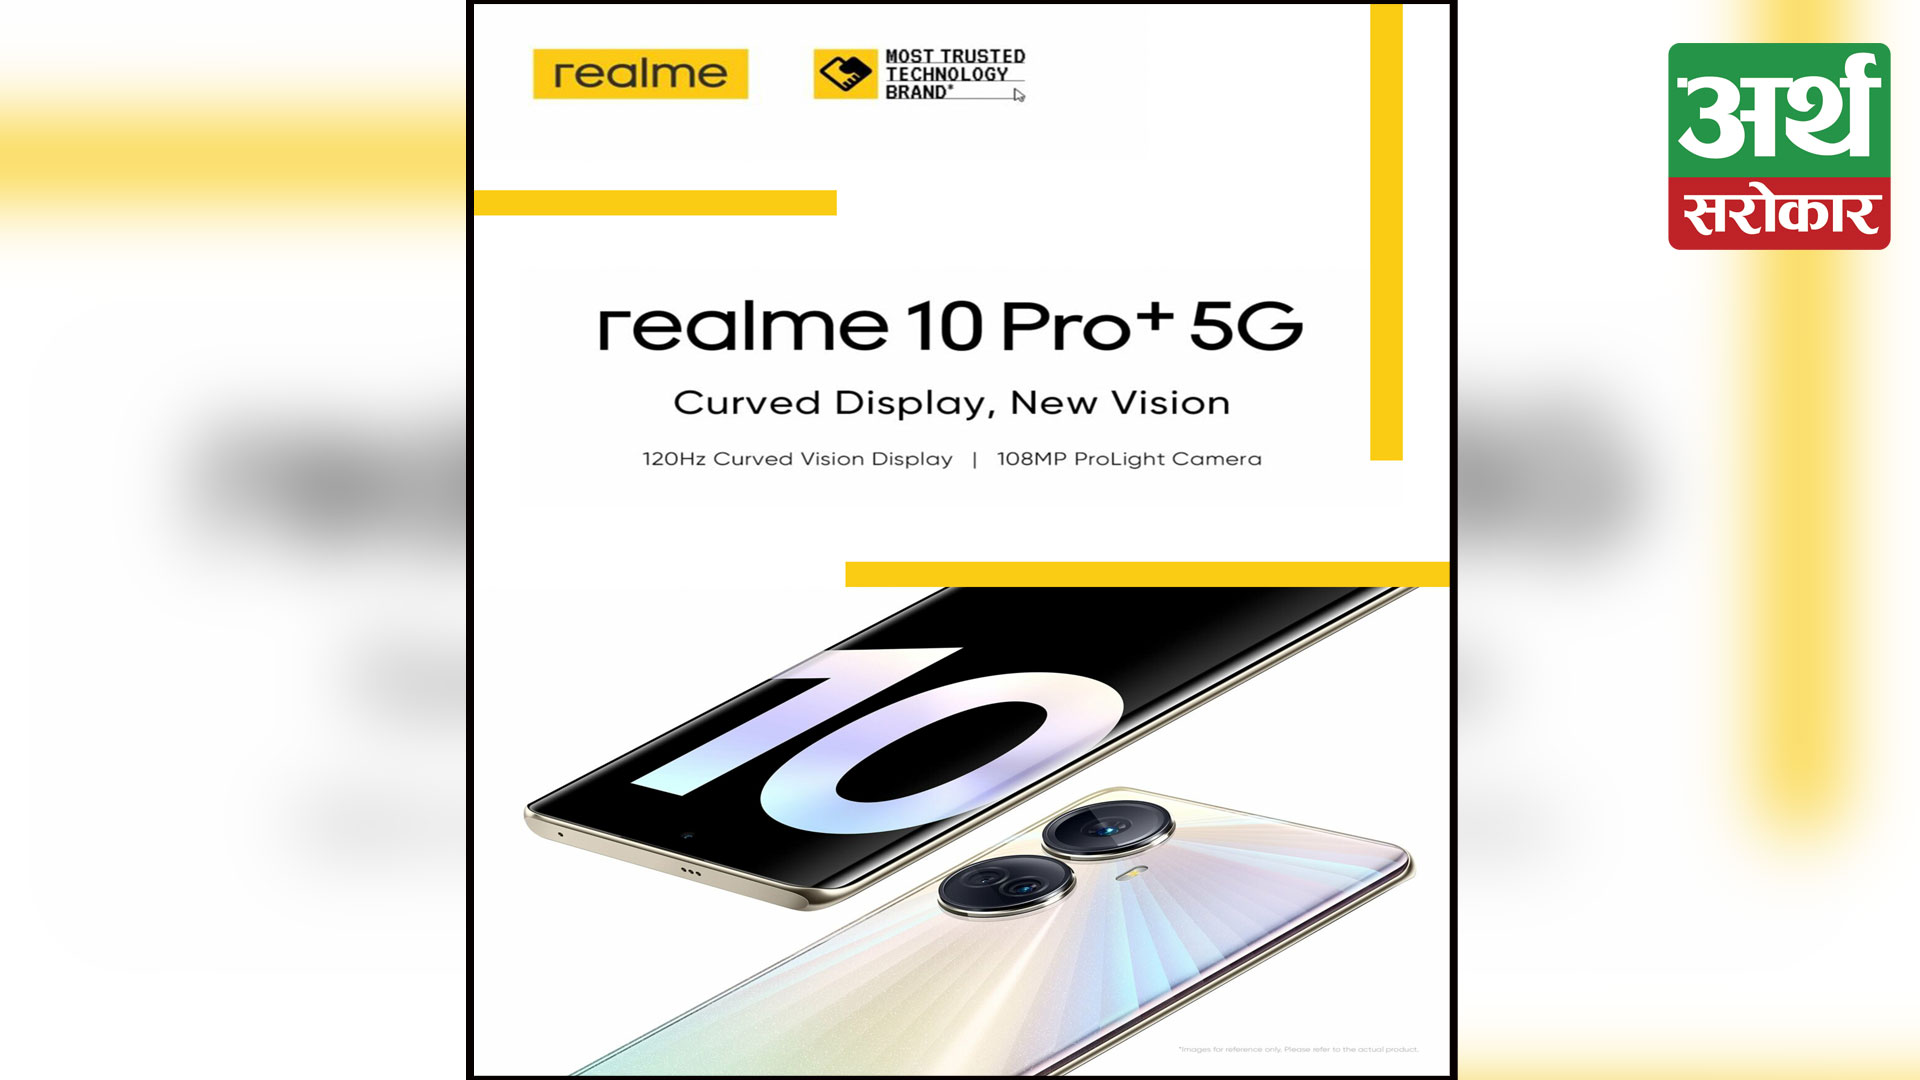 Shattering Boundaries of The Midrange Smartphone Experience, the realme 10 Pro+ 5G Launched in Nepal